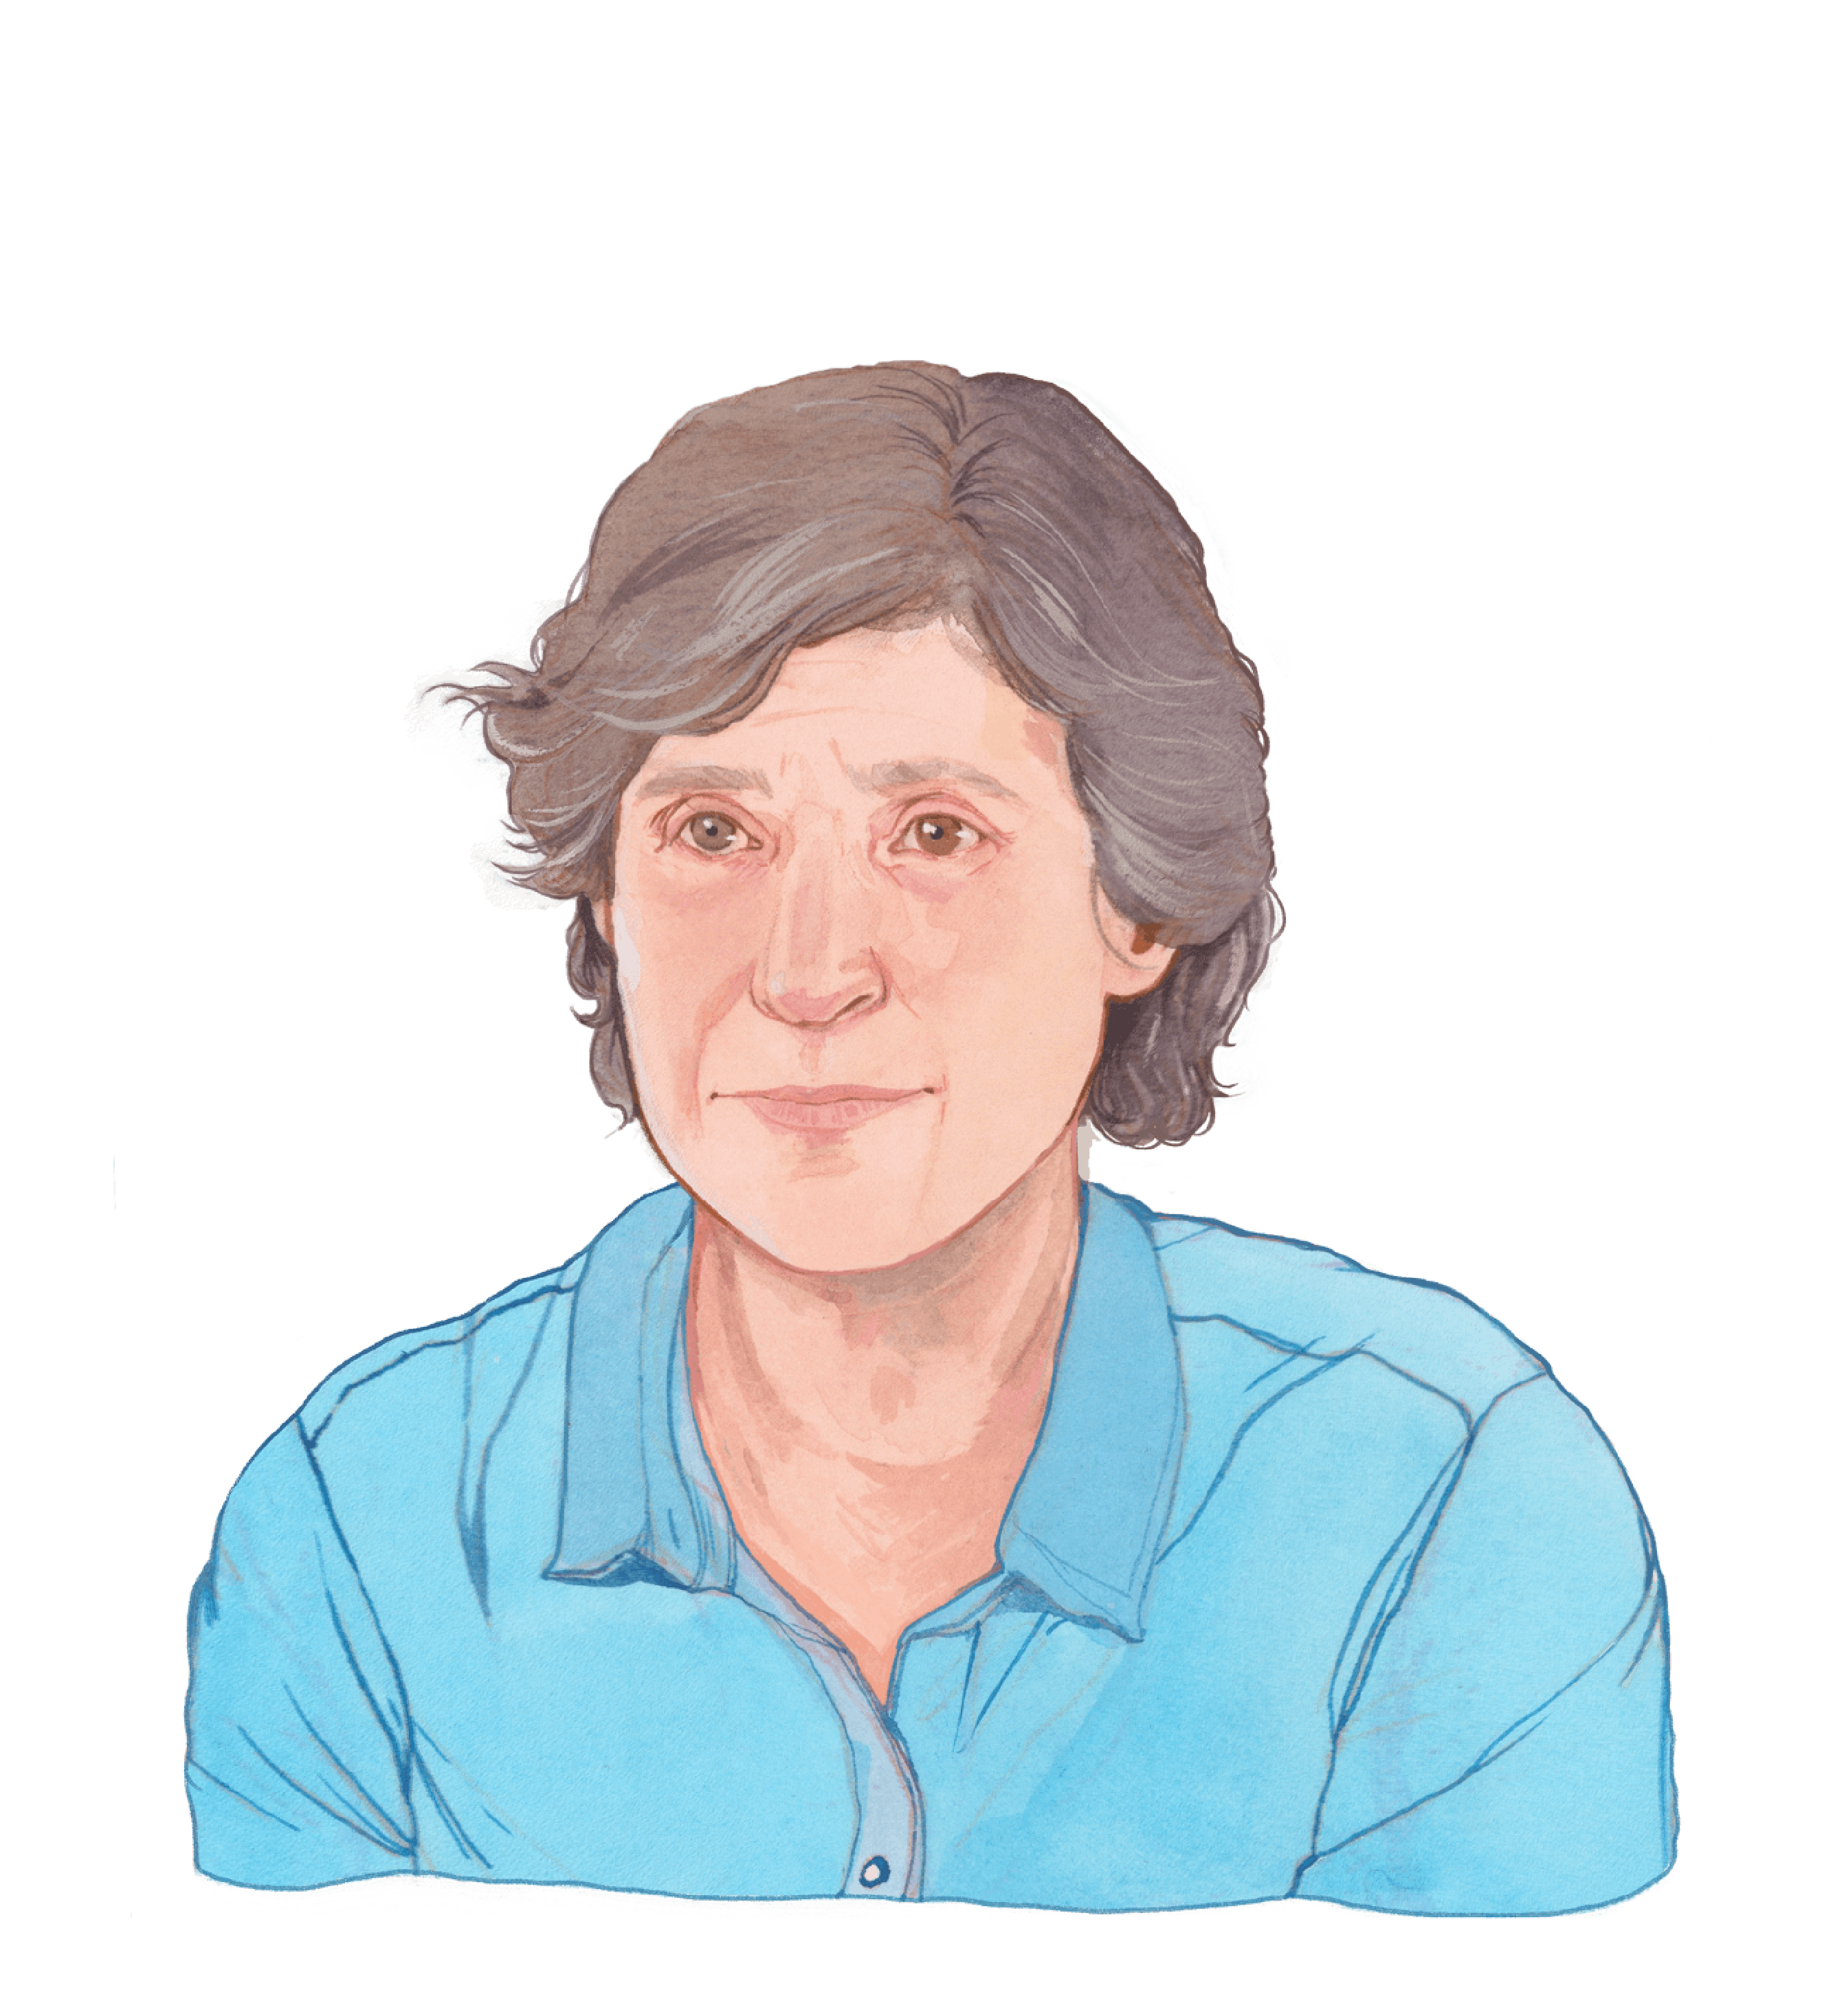 Color illustration of Elizabeth Glaser, a person with a light skin tone wearing a light blue open collar shirt. They have parted gray short hair and a calm expression on their face.